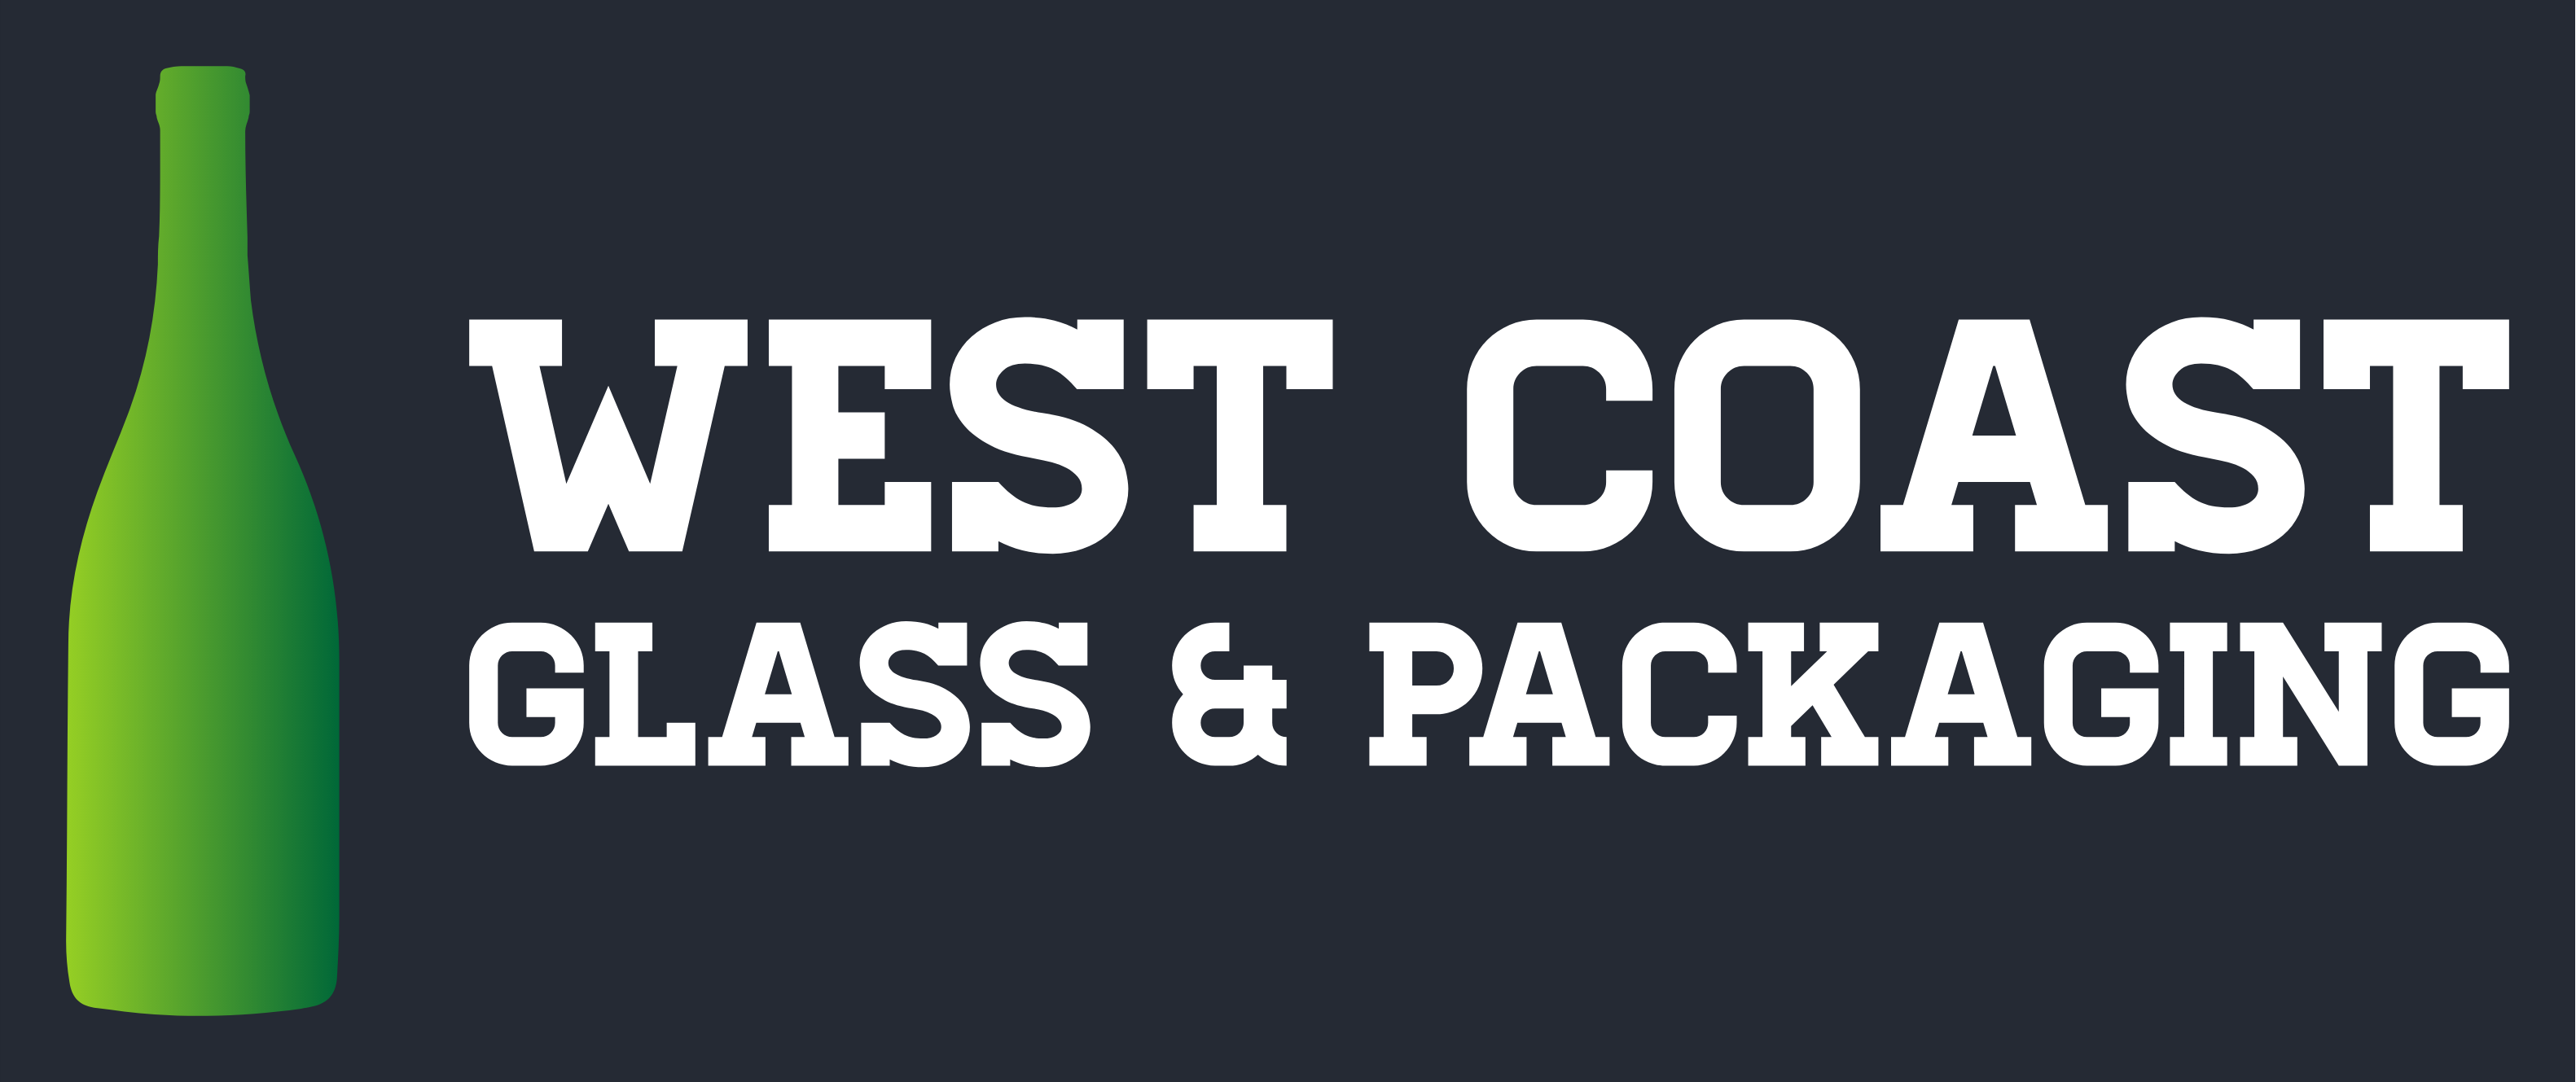 West Coast Glass & Packaging